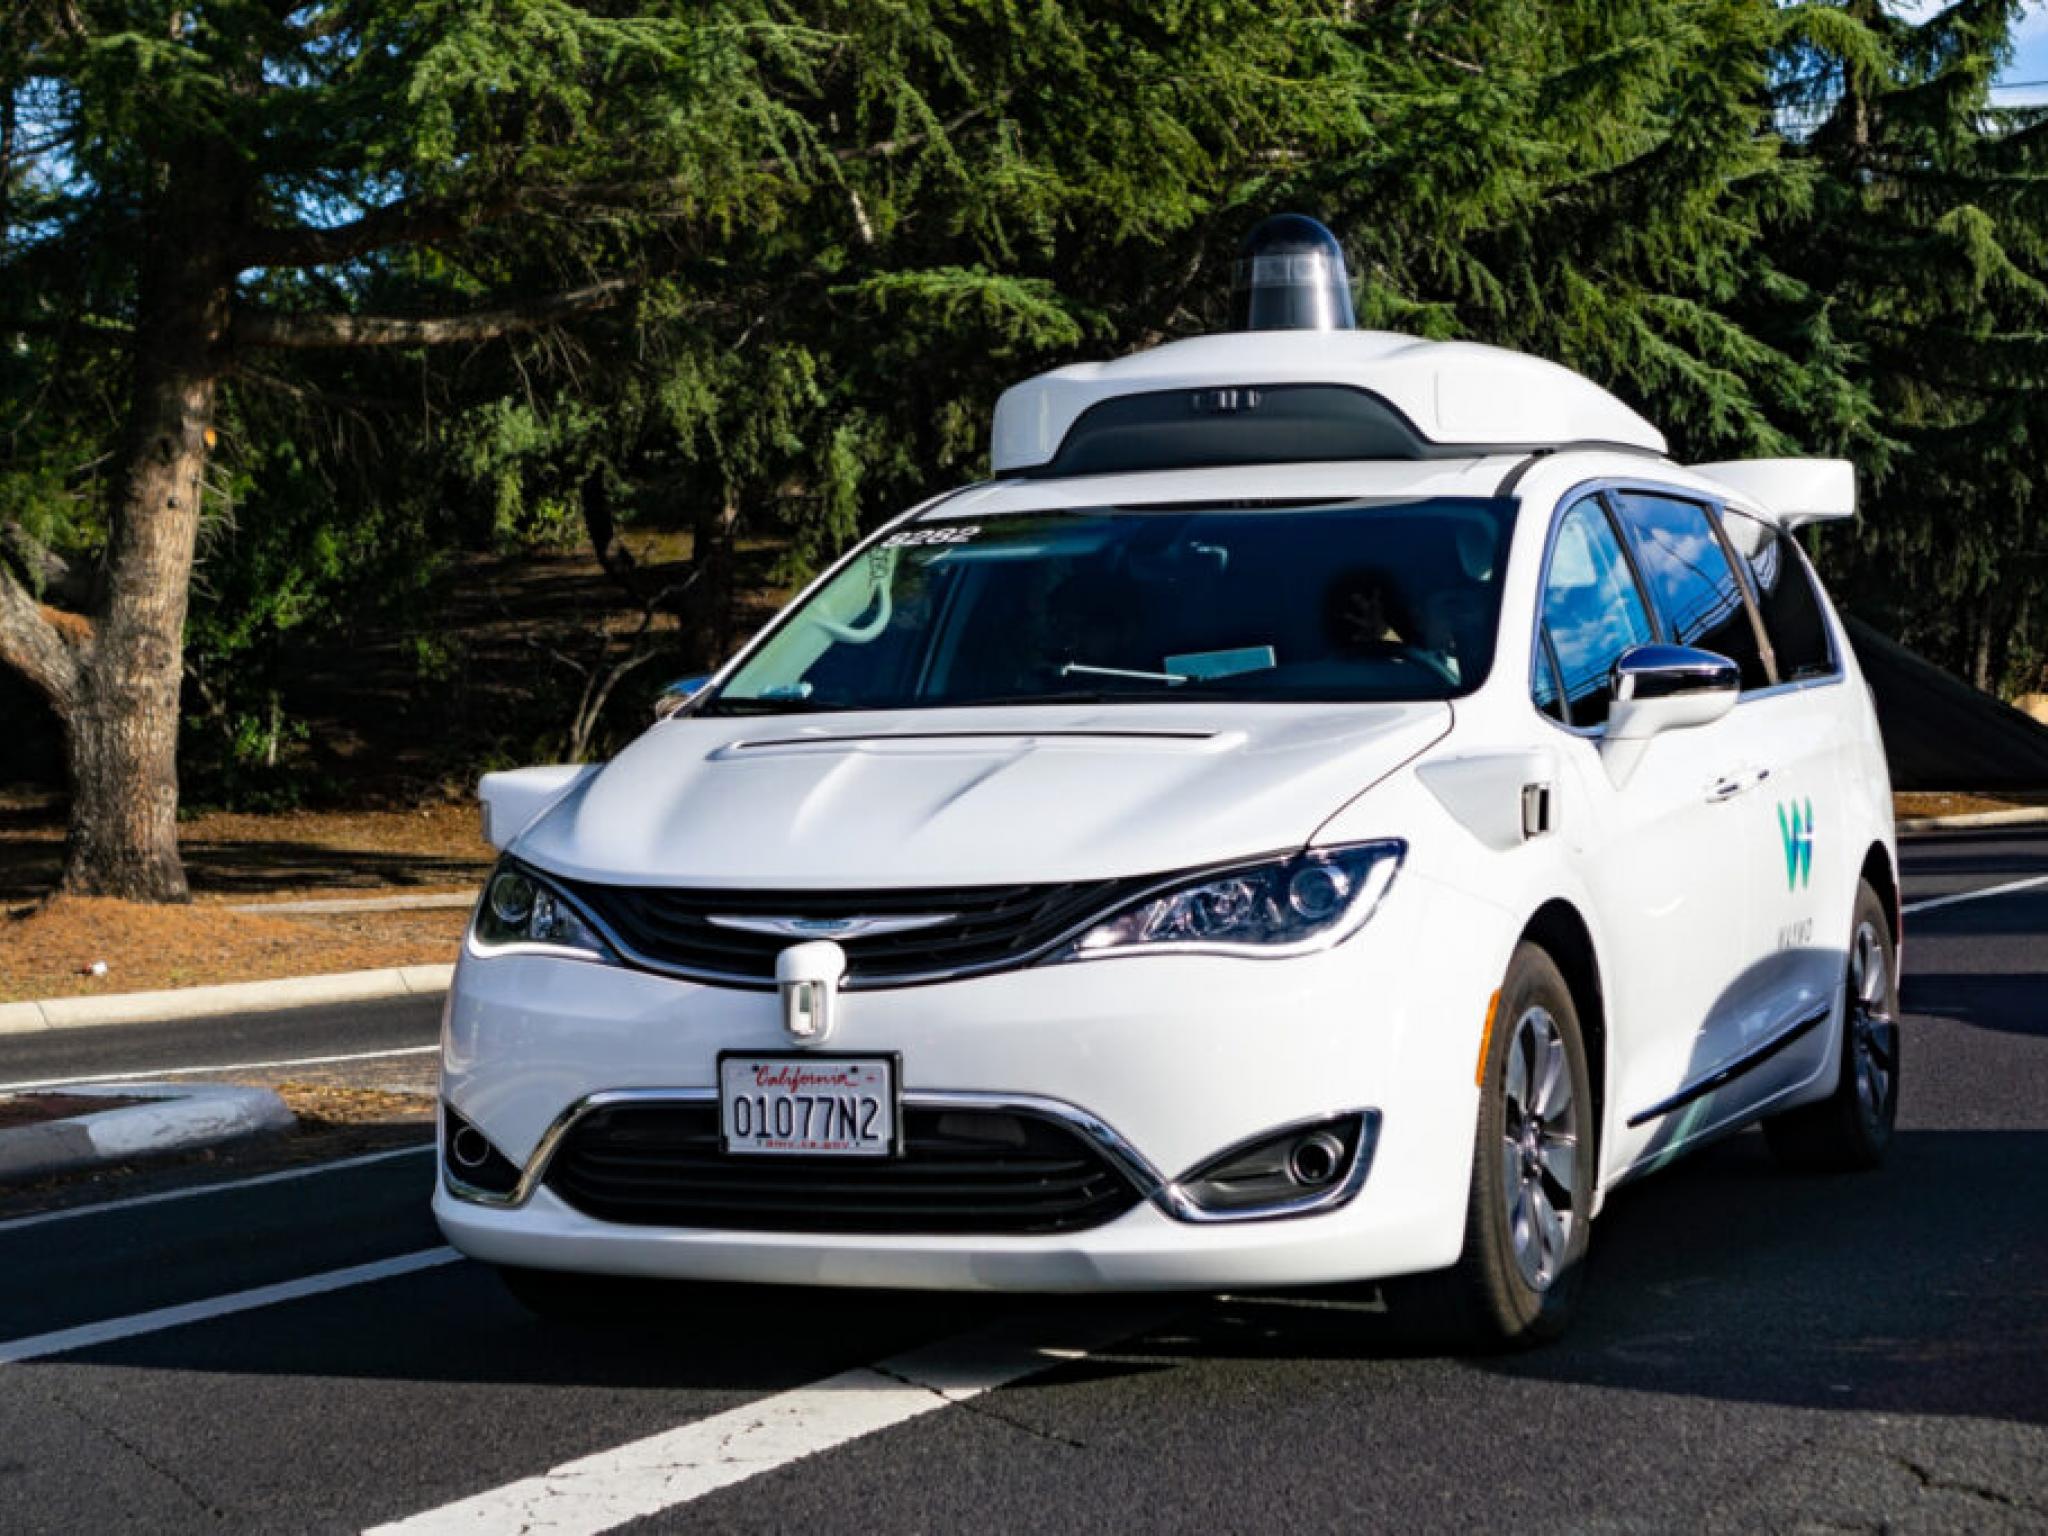  waymo-autonomous-rides-now-available-to-everyone-in-san-francisco-heres-how-you-can-enjoy-driverless-car-travel 